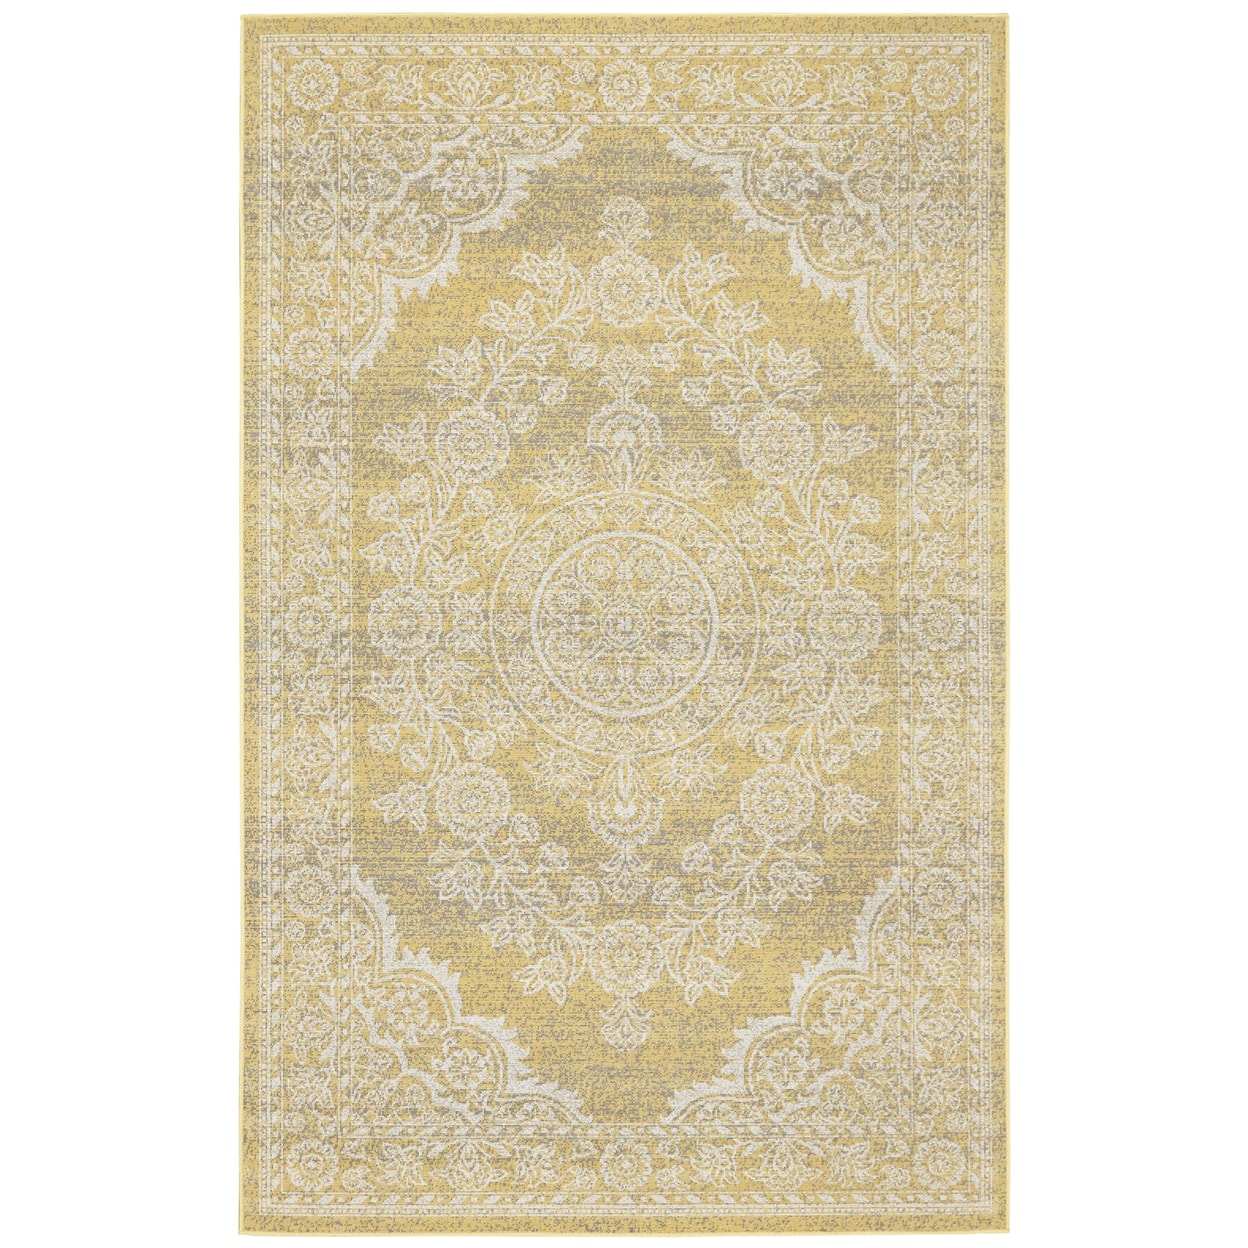 Feizy Rugs Thatcher Straw 8' X 11' Area Rug